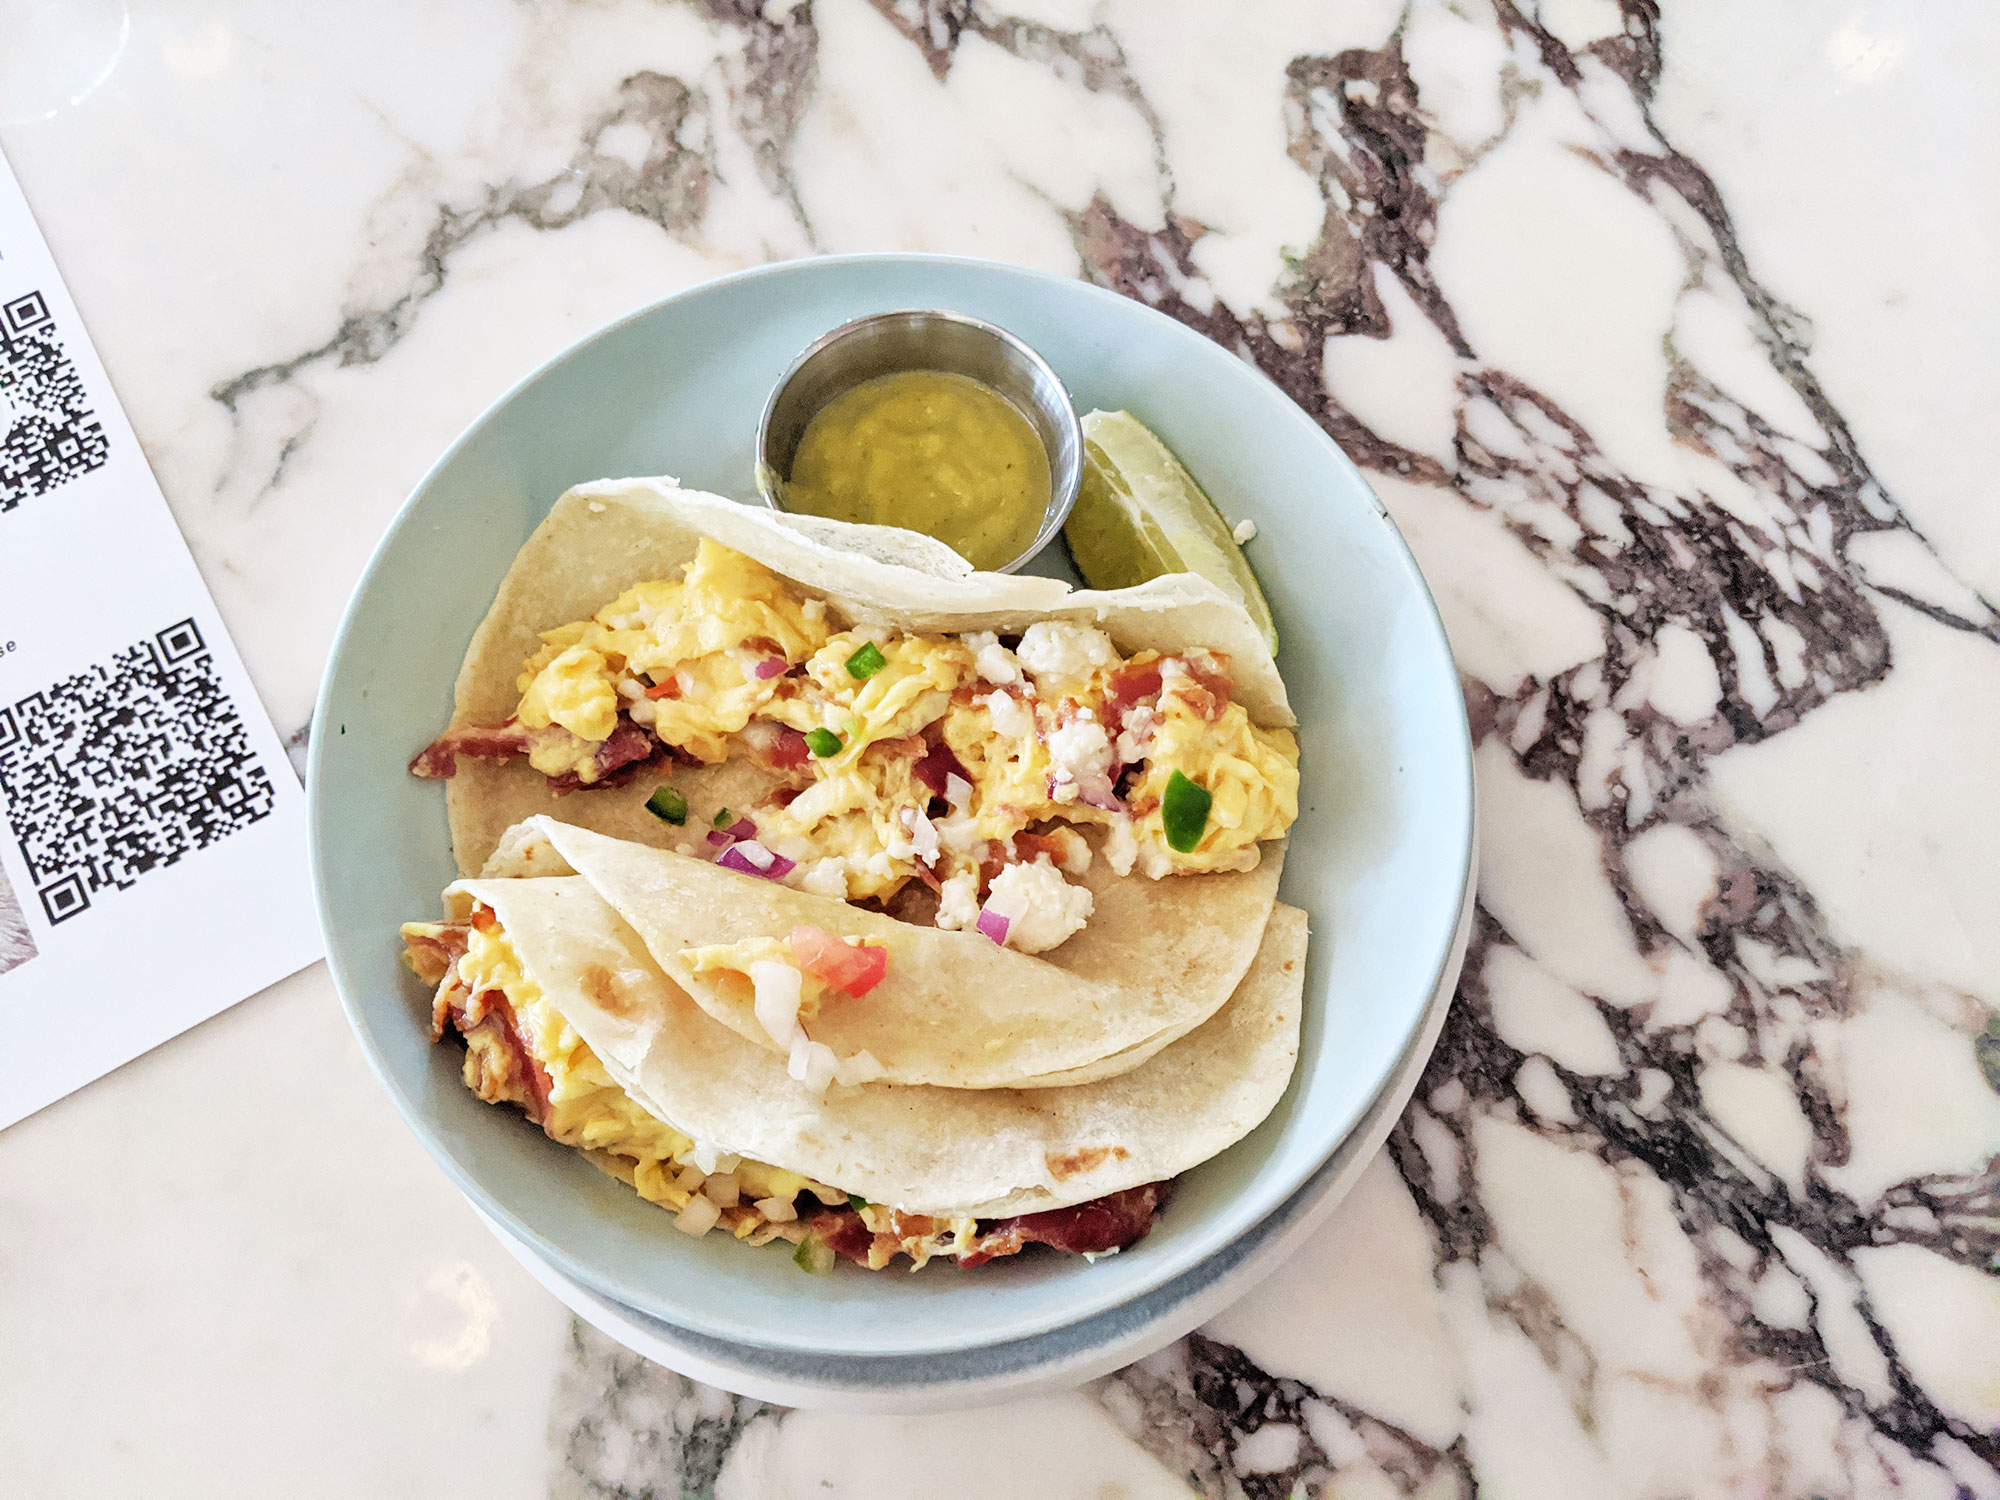 The breakfast tacos at the Commons Club brunch at the Virgin Hotel Dallas.